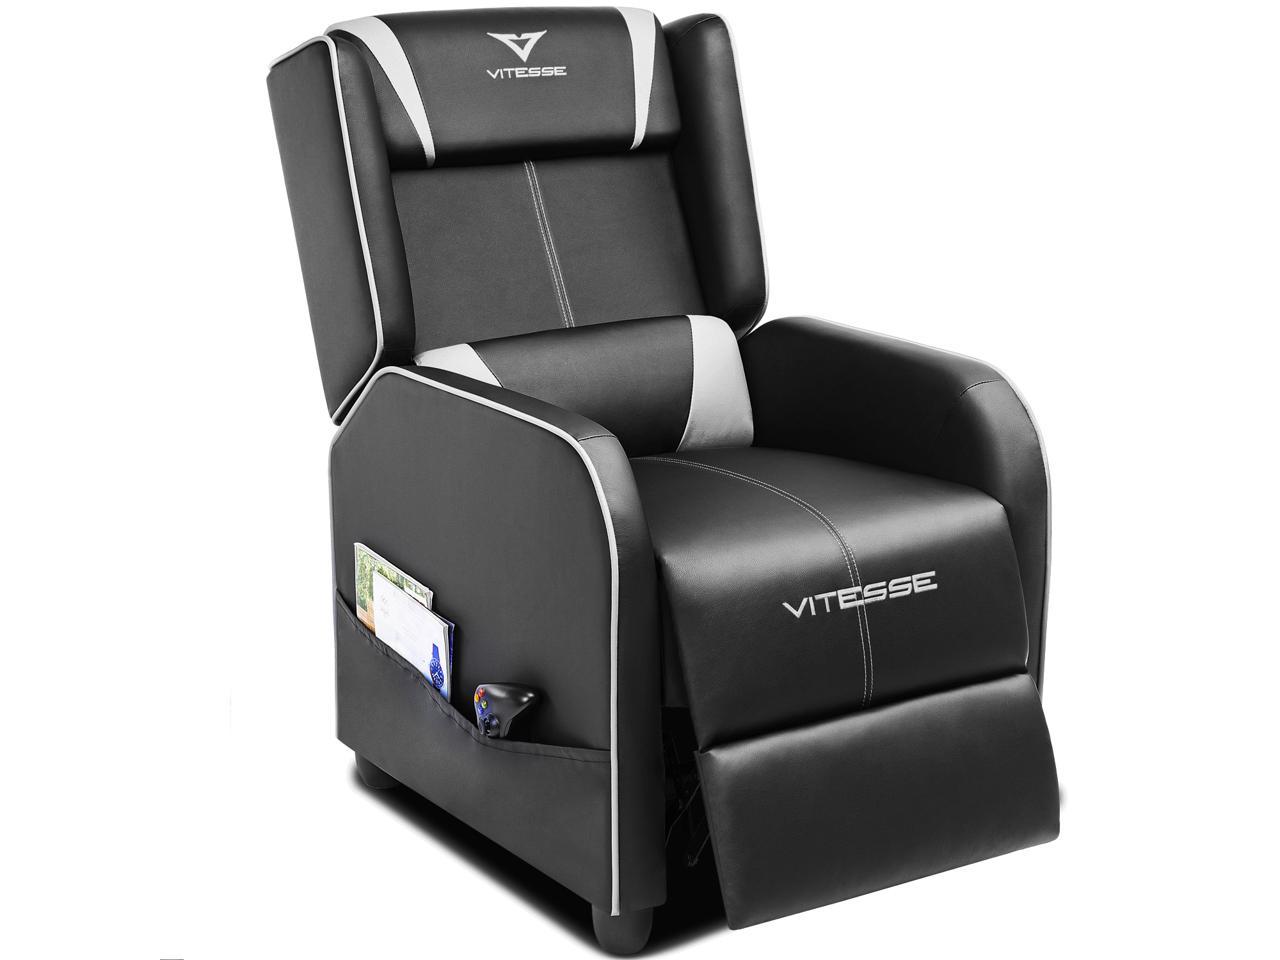 Vitesse Gaming Recliner Chair - Gaming Chair Recliner Vitesse Theater